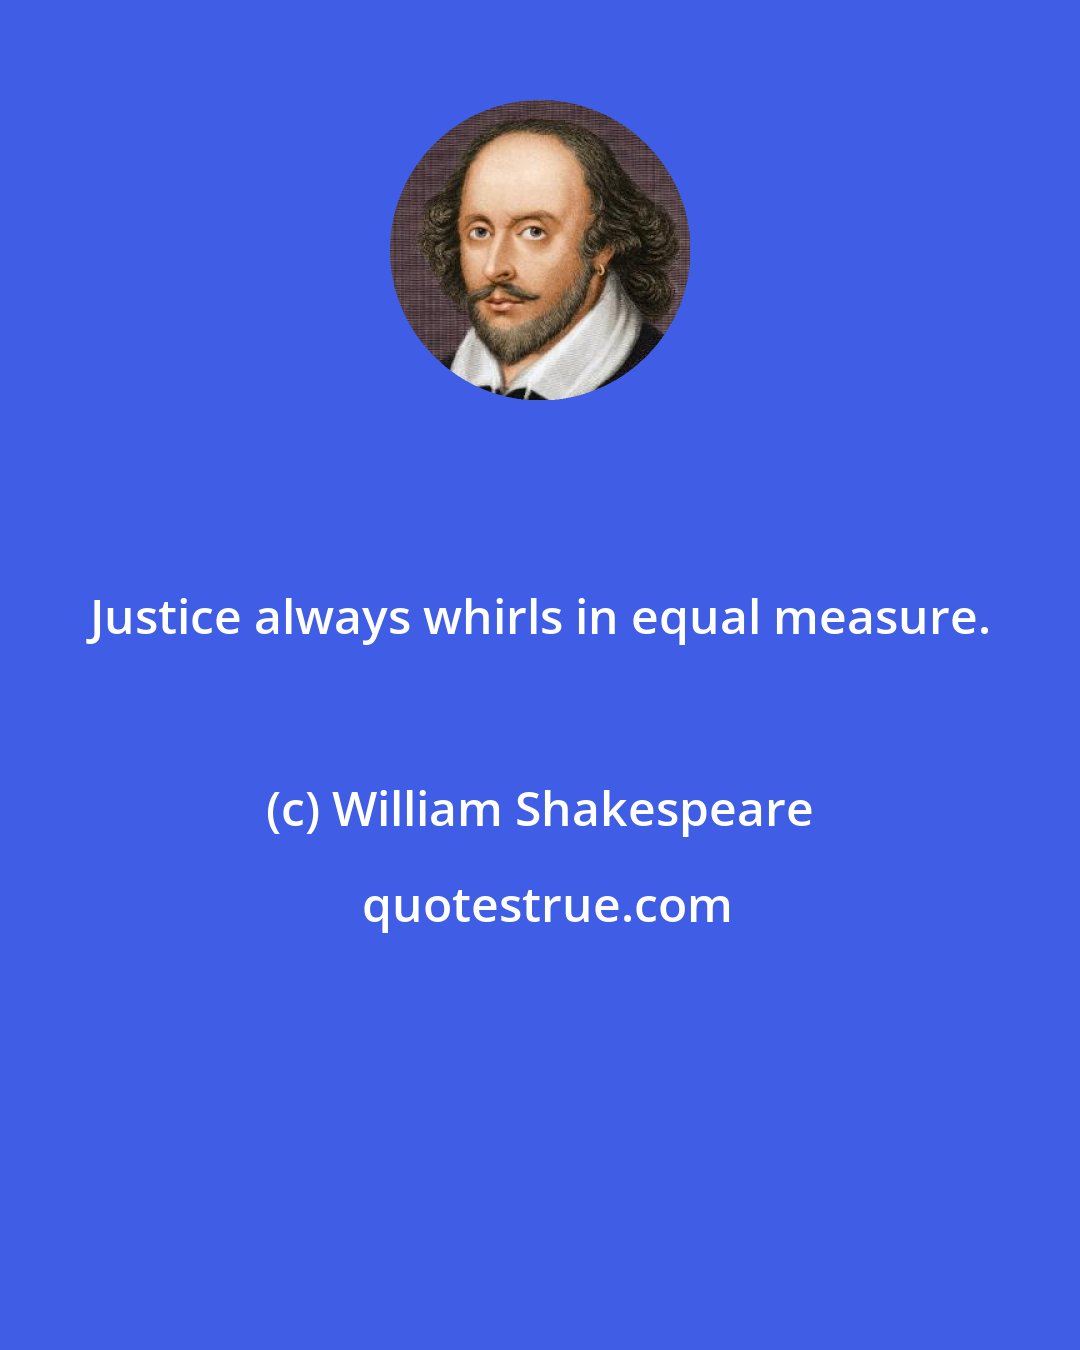 William Shakespeare: Justice always whirls in equal measure.